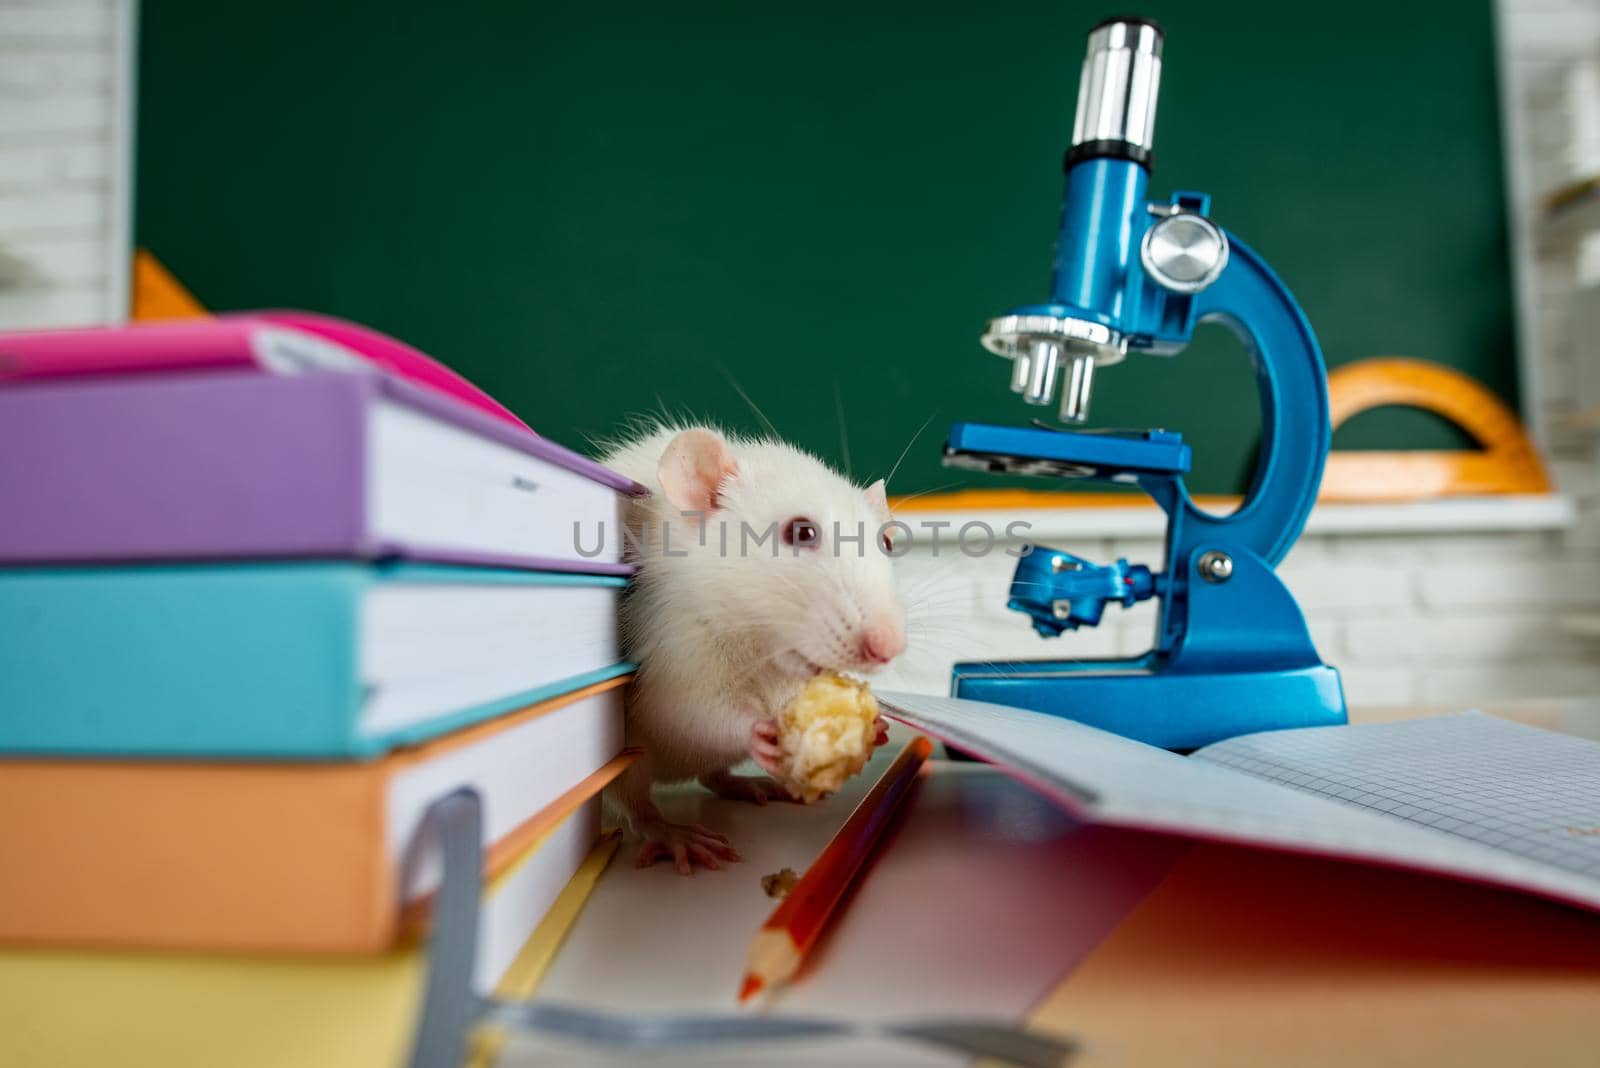 Design for book library, learning, education. Concept for university college or school. Funny rat student